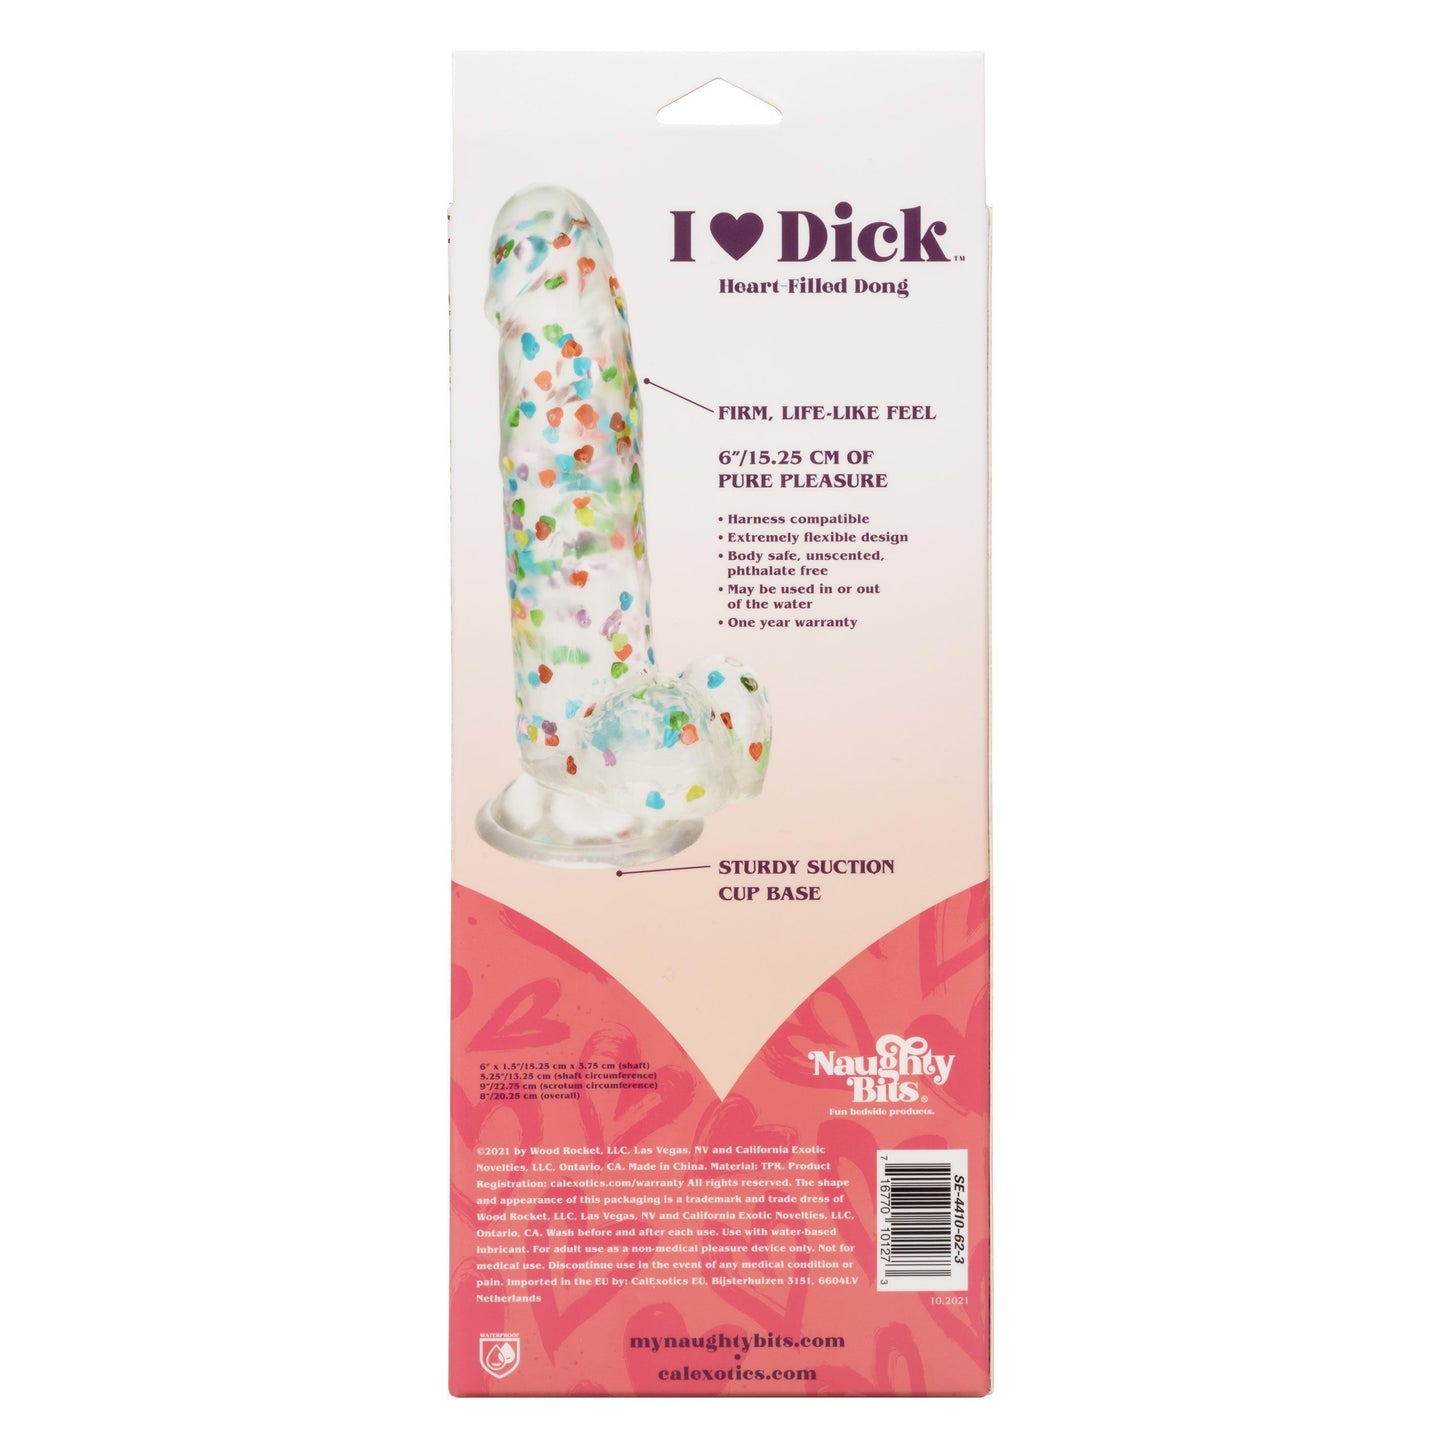 Naughty Bits I Love Dick Heart-Filled Dong - My Sex Toy Hub